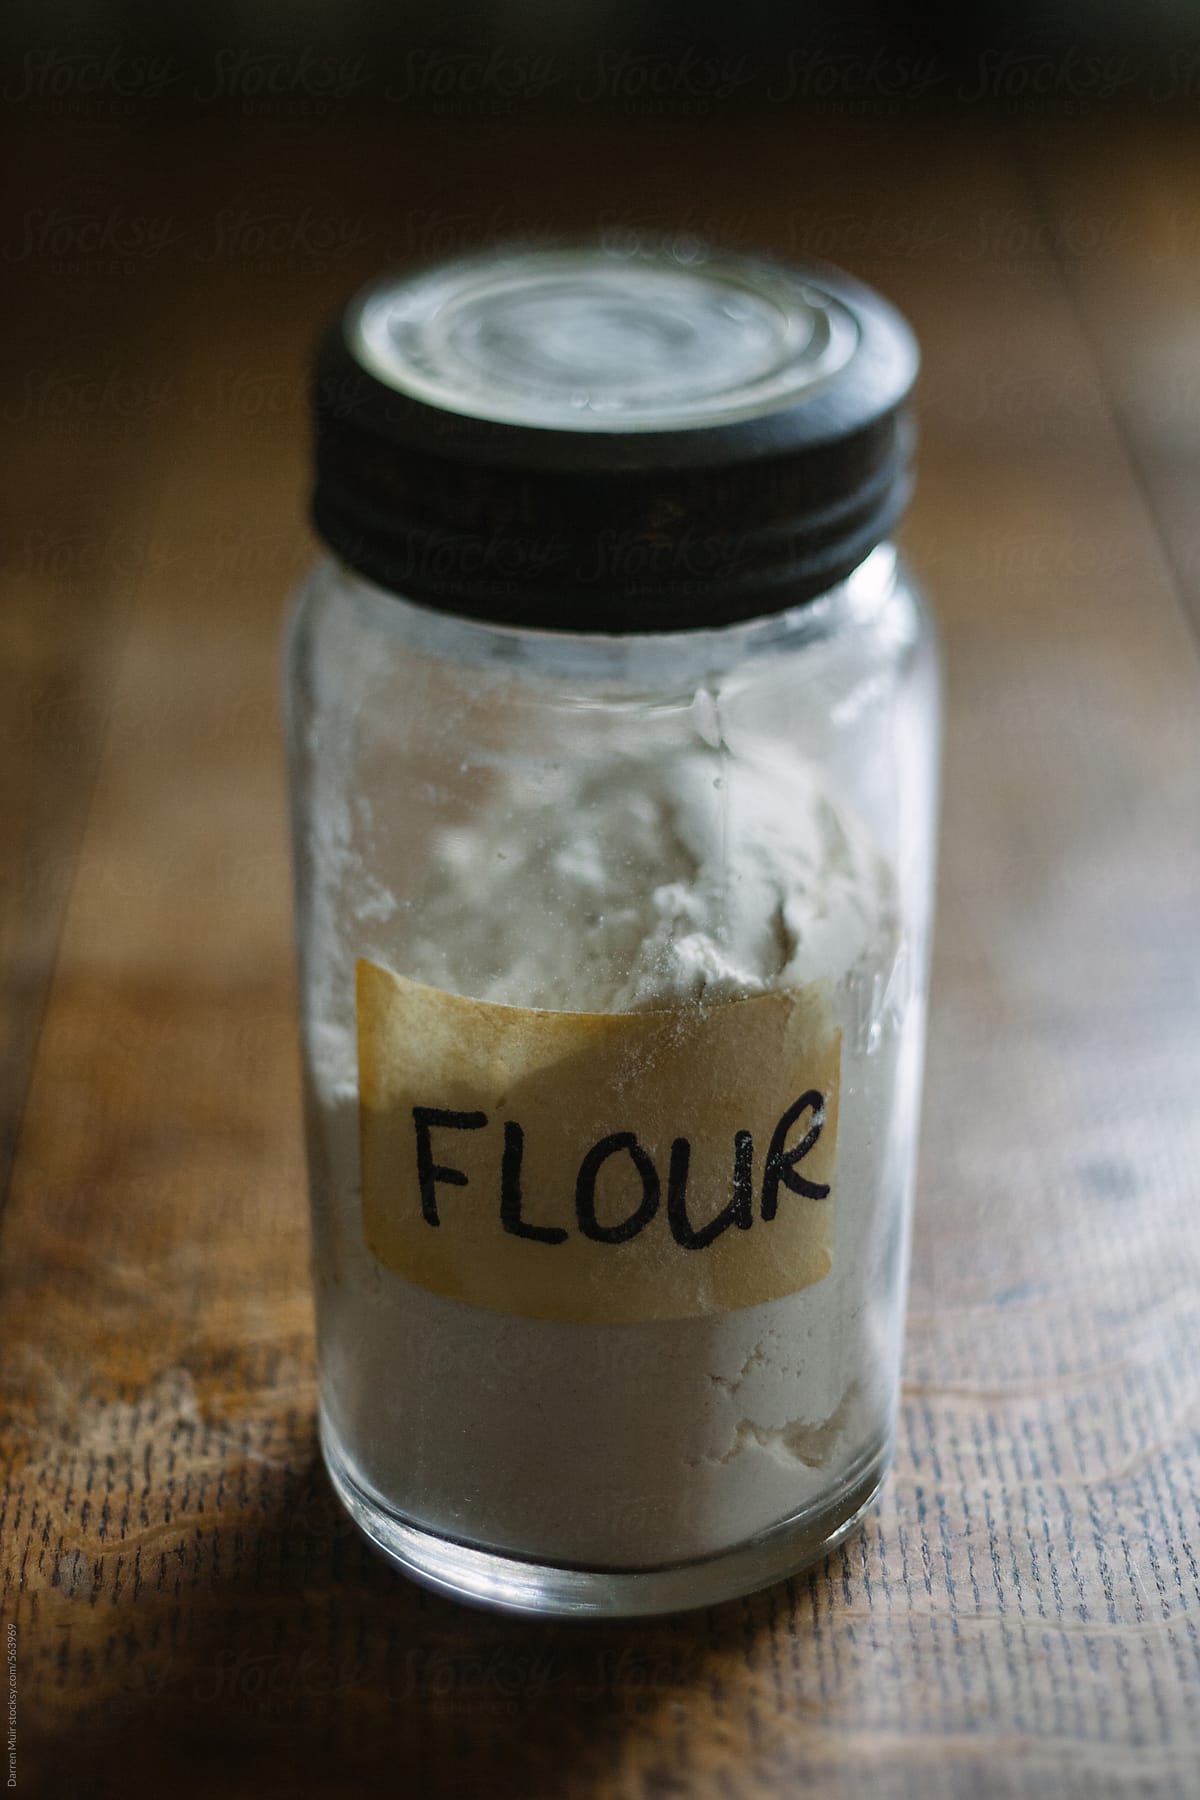 Old glass jar of flour on wooden table.